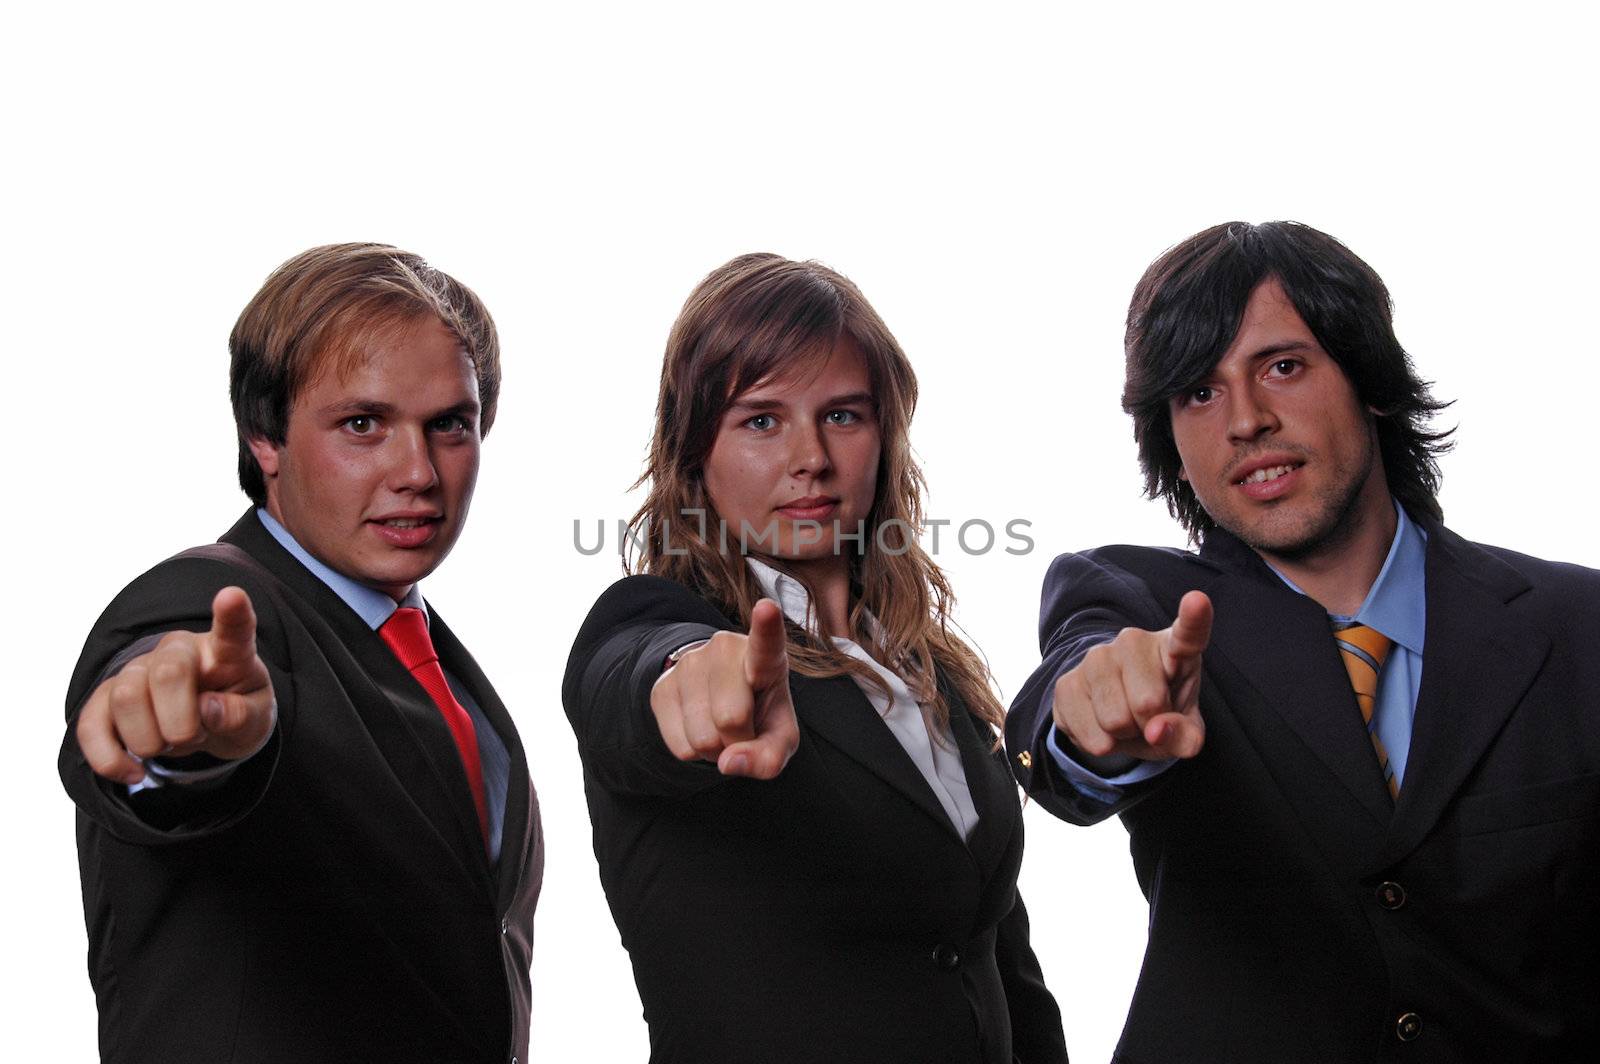 young businessteam pointingto front ove white background by raalves